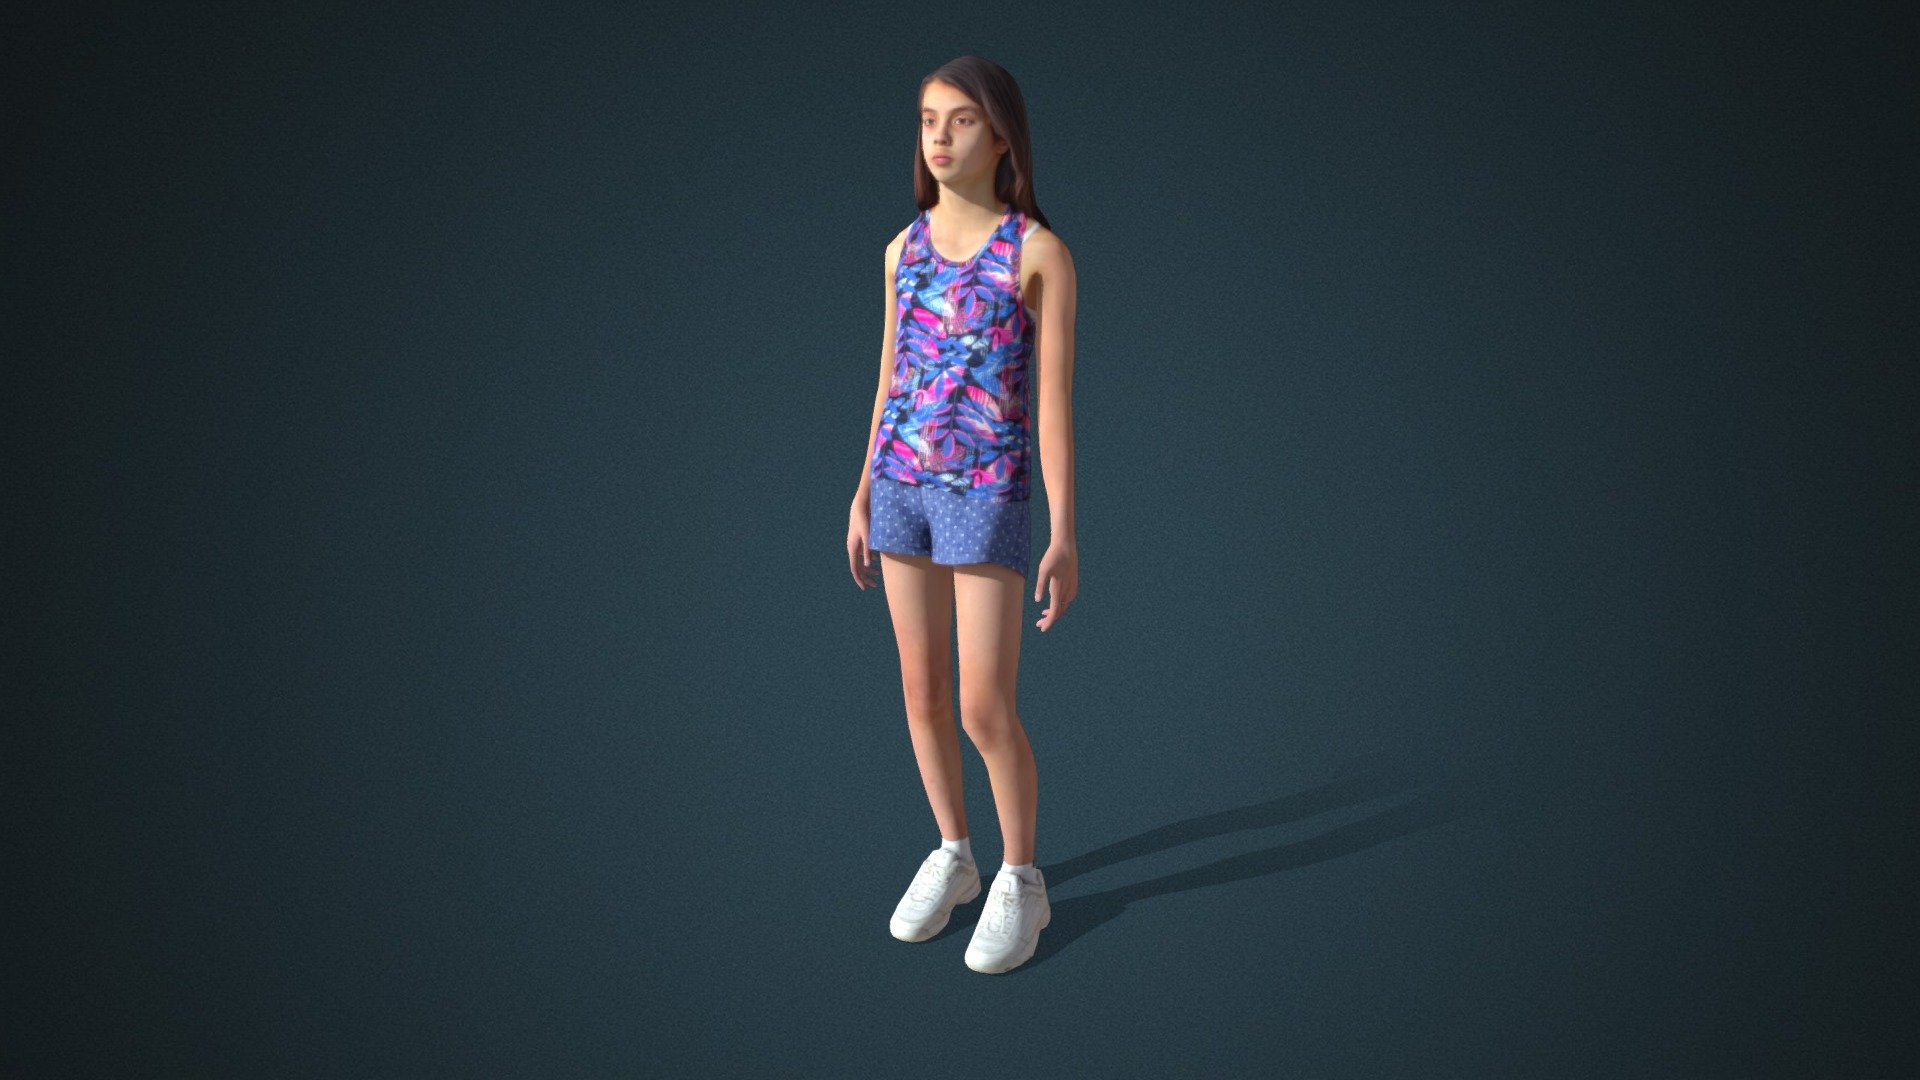 Do you like this model?  Free Download more models, motions and auto rigging tool AccuRIG (Value: $150+) on ActorCore
 

This model includes 2 mocap animations: Modern_F_Look around,Modern_F_Walk. Get more free motions

Design for high-performance crowd animation.

Buy full pack and Save 20%+: Teens Vol.2


SPECIFICATIONS

✔ Geometry : 7K~10K Quads, one mesh

✔ Material : One material with changeable colors.

✔ Texture Resolution : 4K

✔ Shader : PBR, Diffuse, Normal, Roughness, Metallic, Opacity

✔ Rigged : Facial and Body (shoulders, fingers, toes, eyeballs, jaw)

✔ Blendshape : 122 for facial expressions and lipsync

✔ Compatible with iClone AccuLips, Facial ExPlus, and traditional lip-sync.


About Reallusion ActorCore

ActorCore offers the highest quality 3D asset libraries for mocap motions and animated 3D humans for crowd rendering 3d model